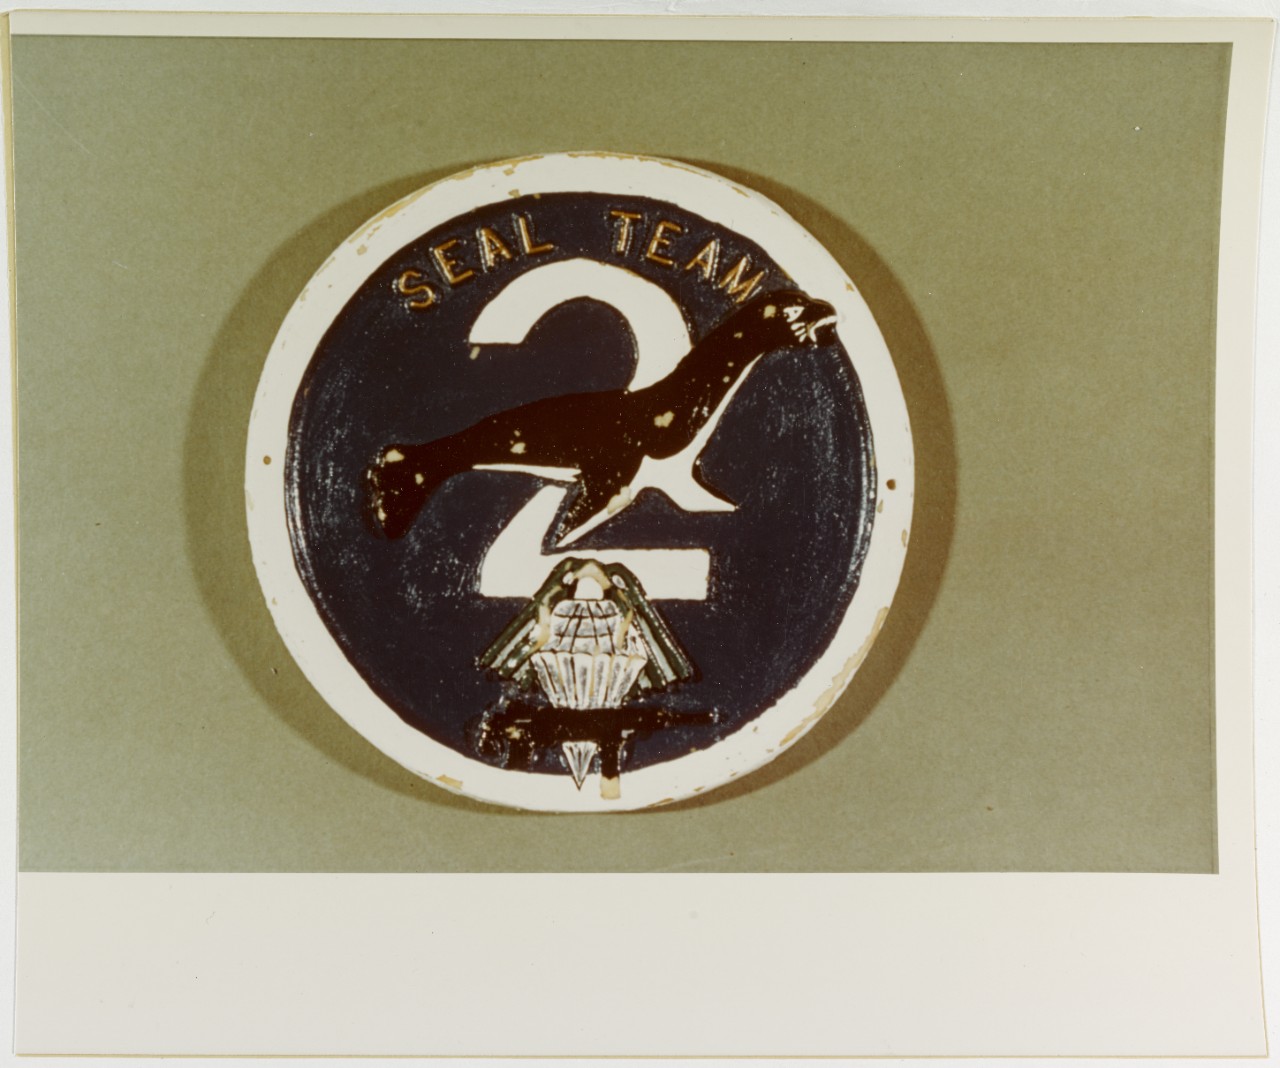 Insignia: Seal Team Two